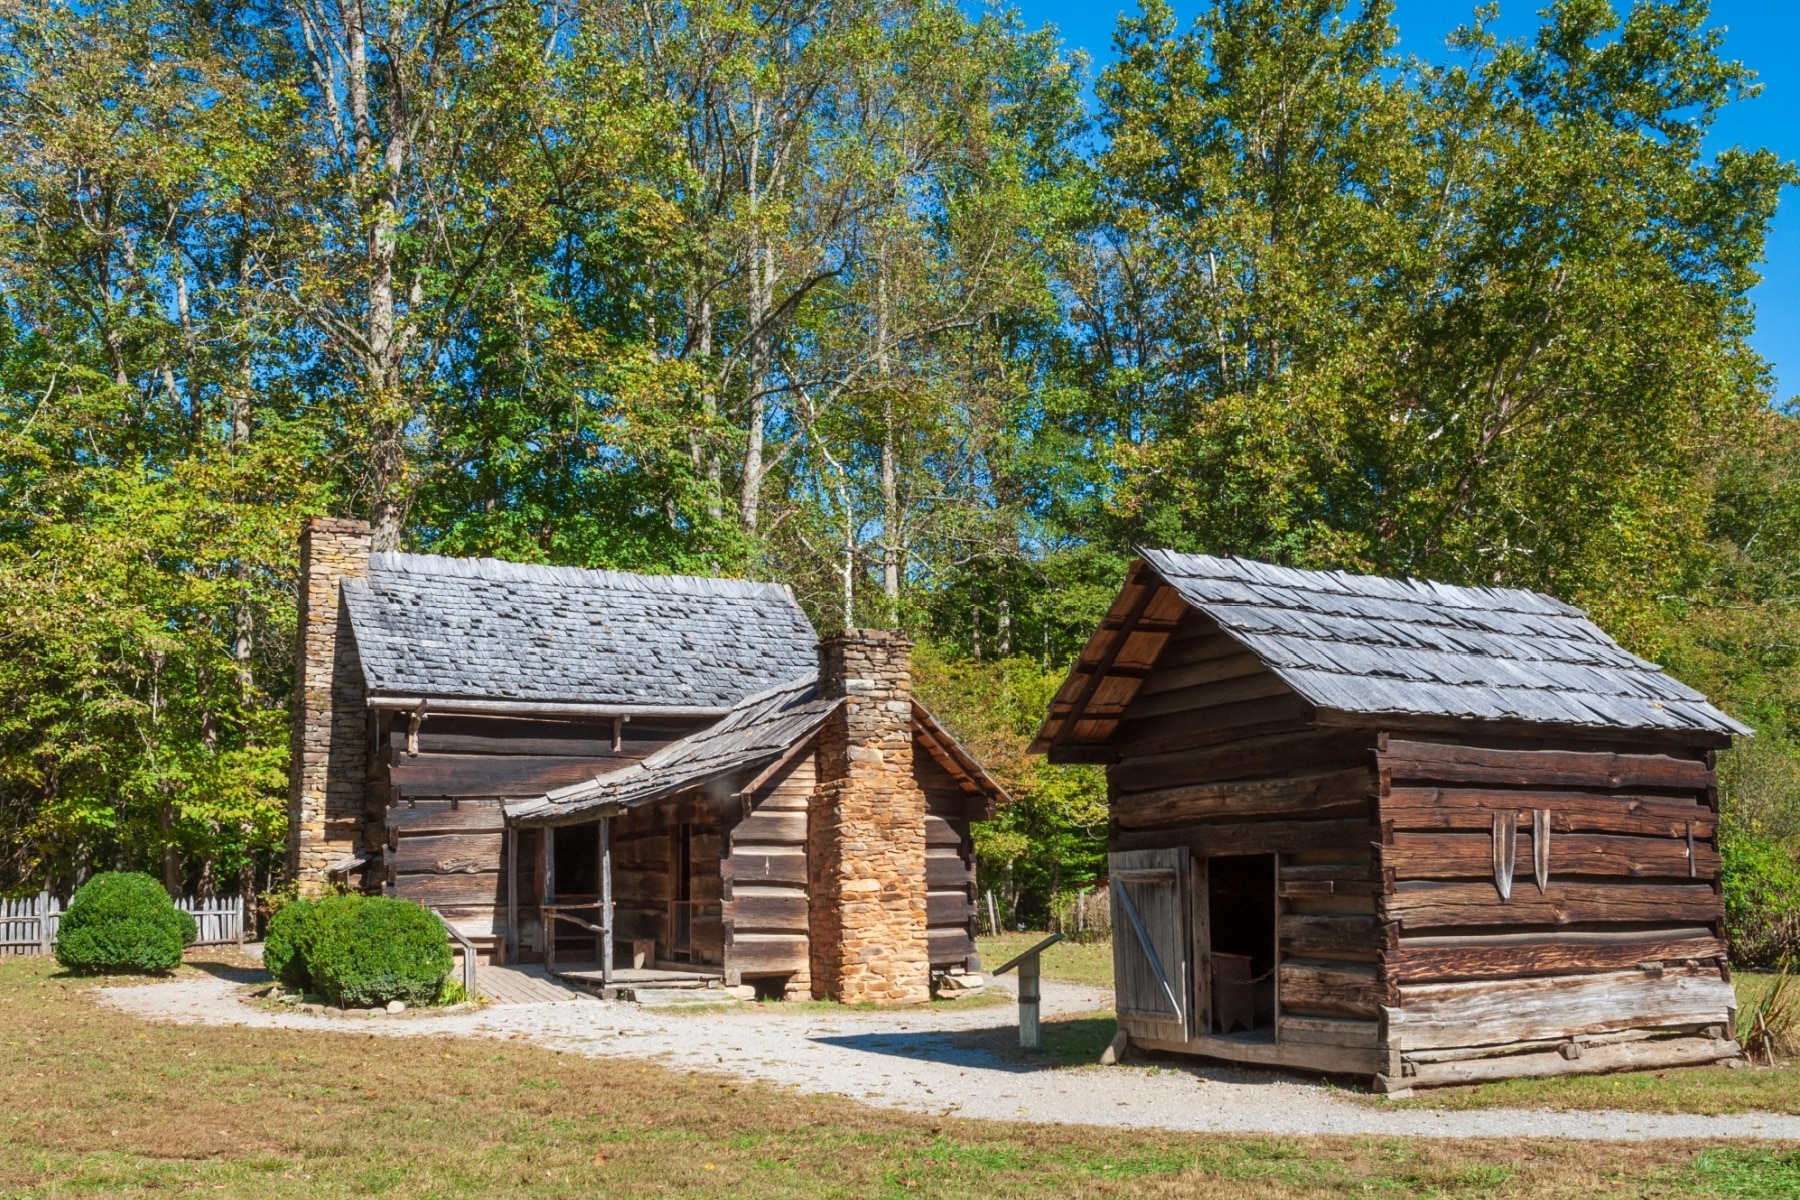 Mountain Farm Museum in Great Smoky Mountains National Park